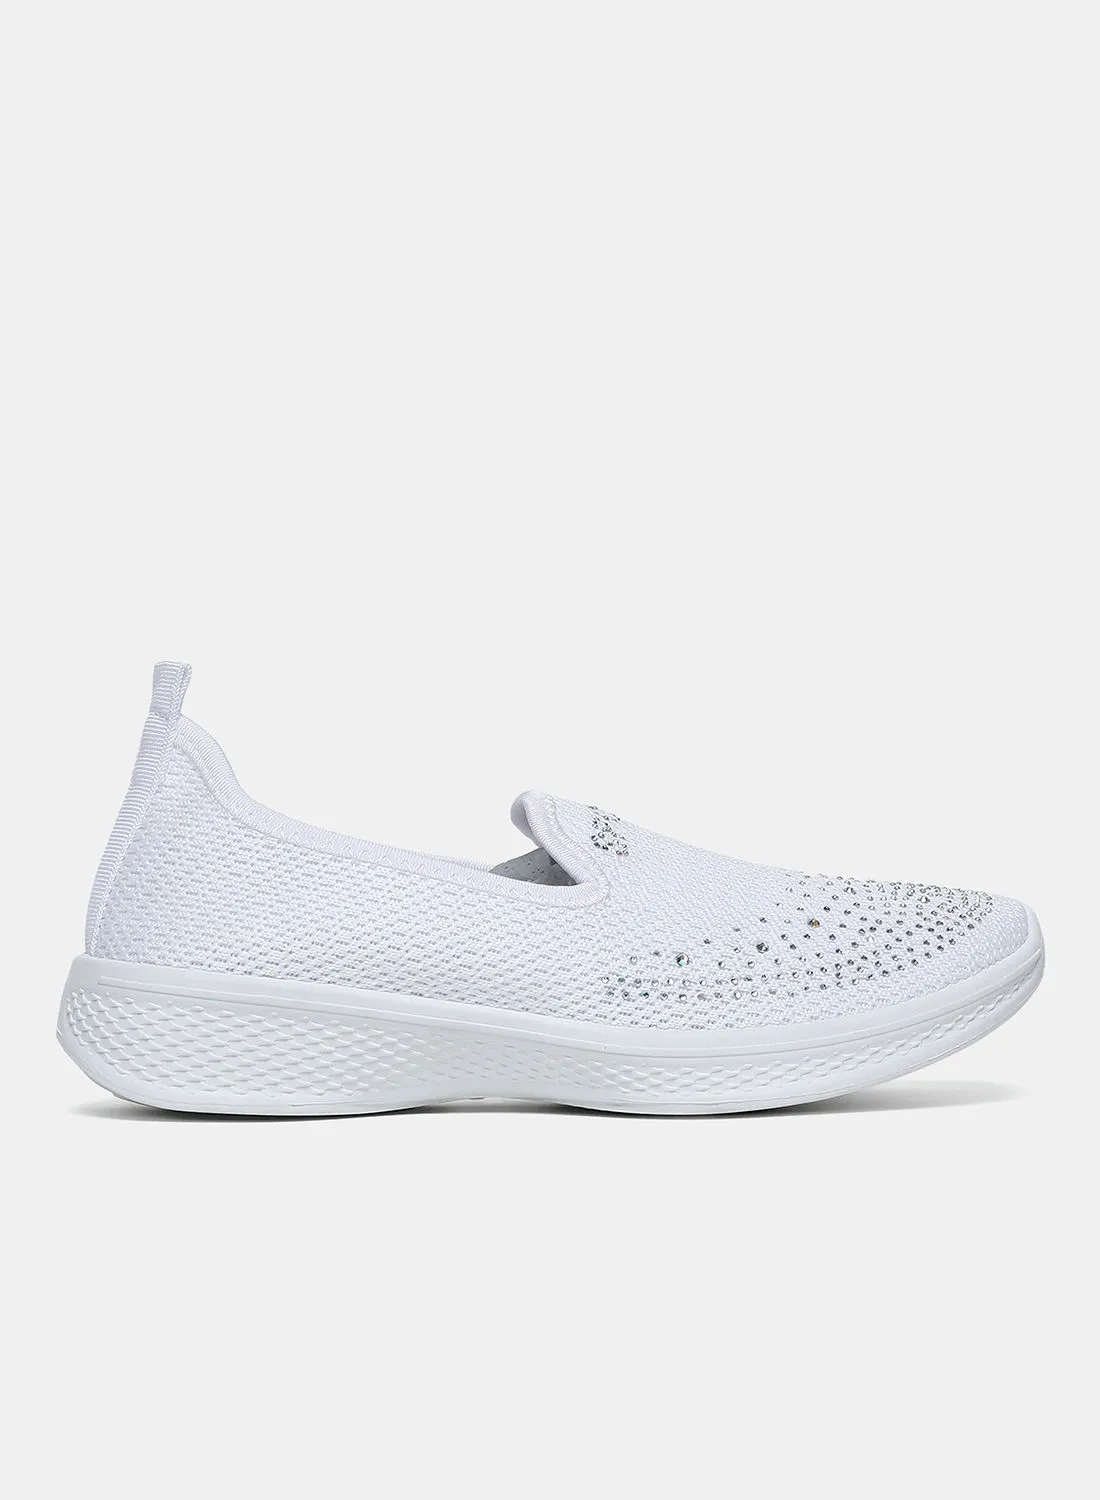 Athletiq Casual Low Top Sneakers White